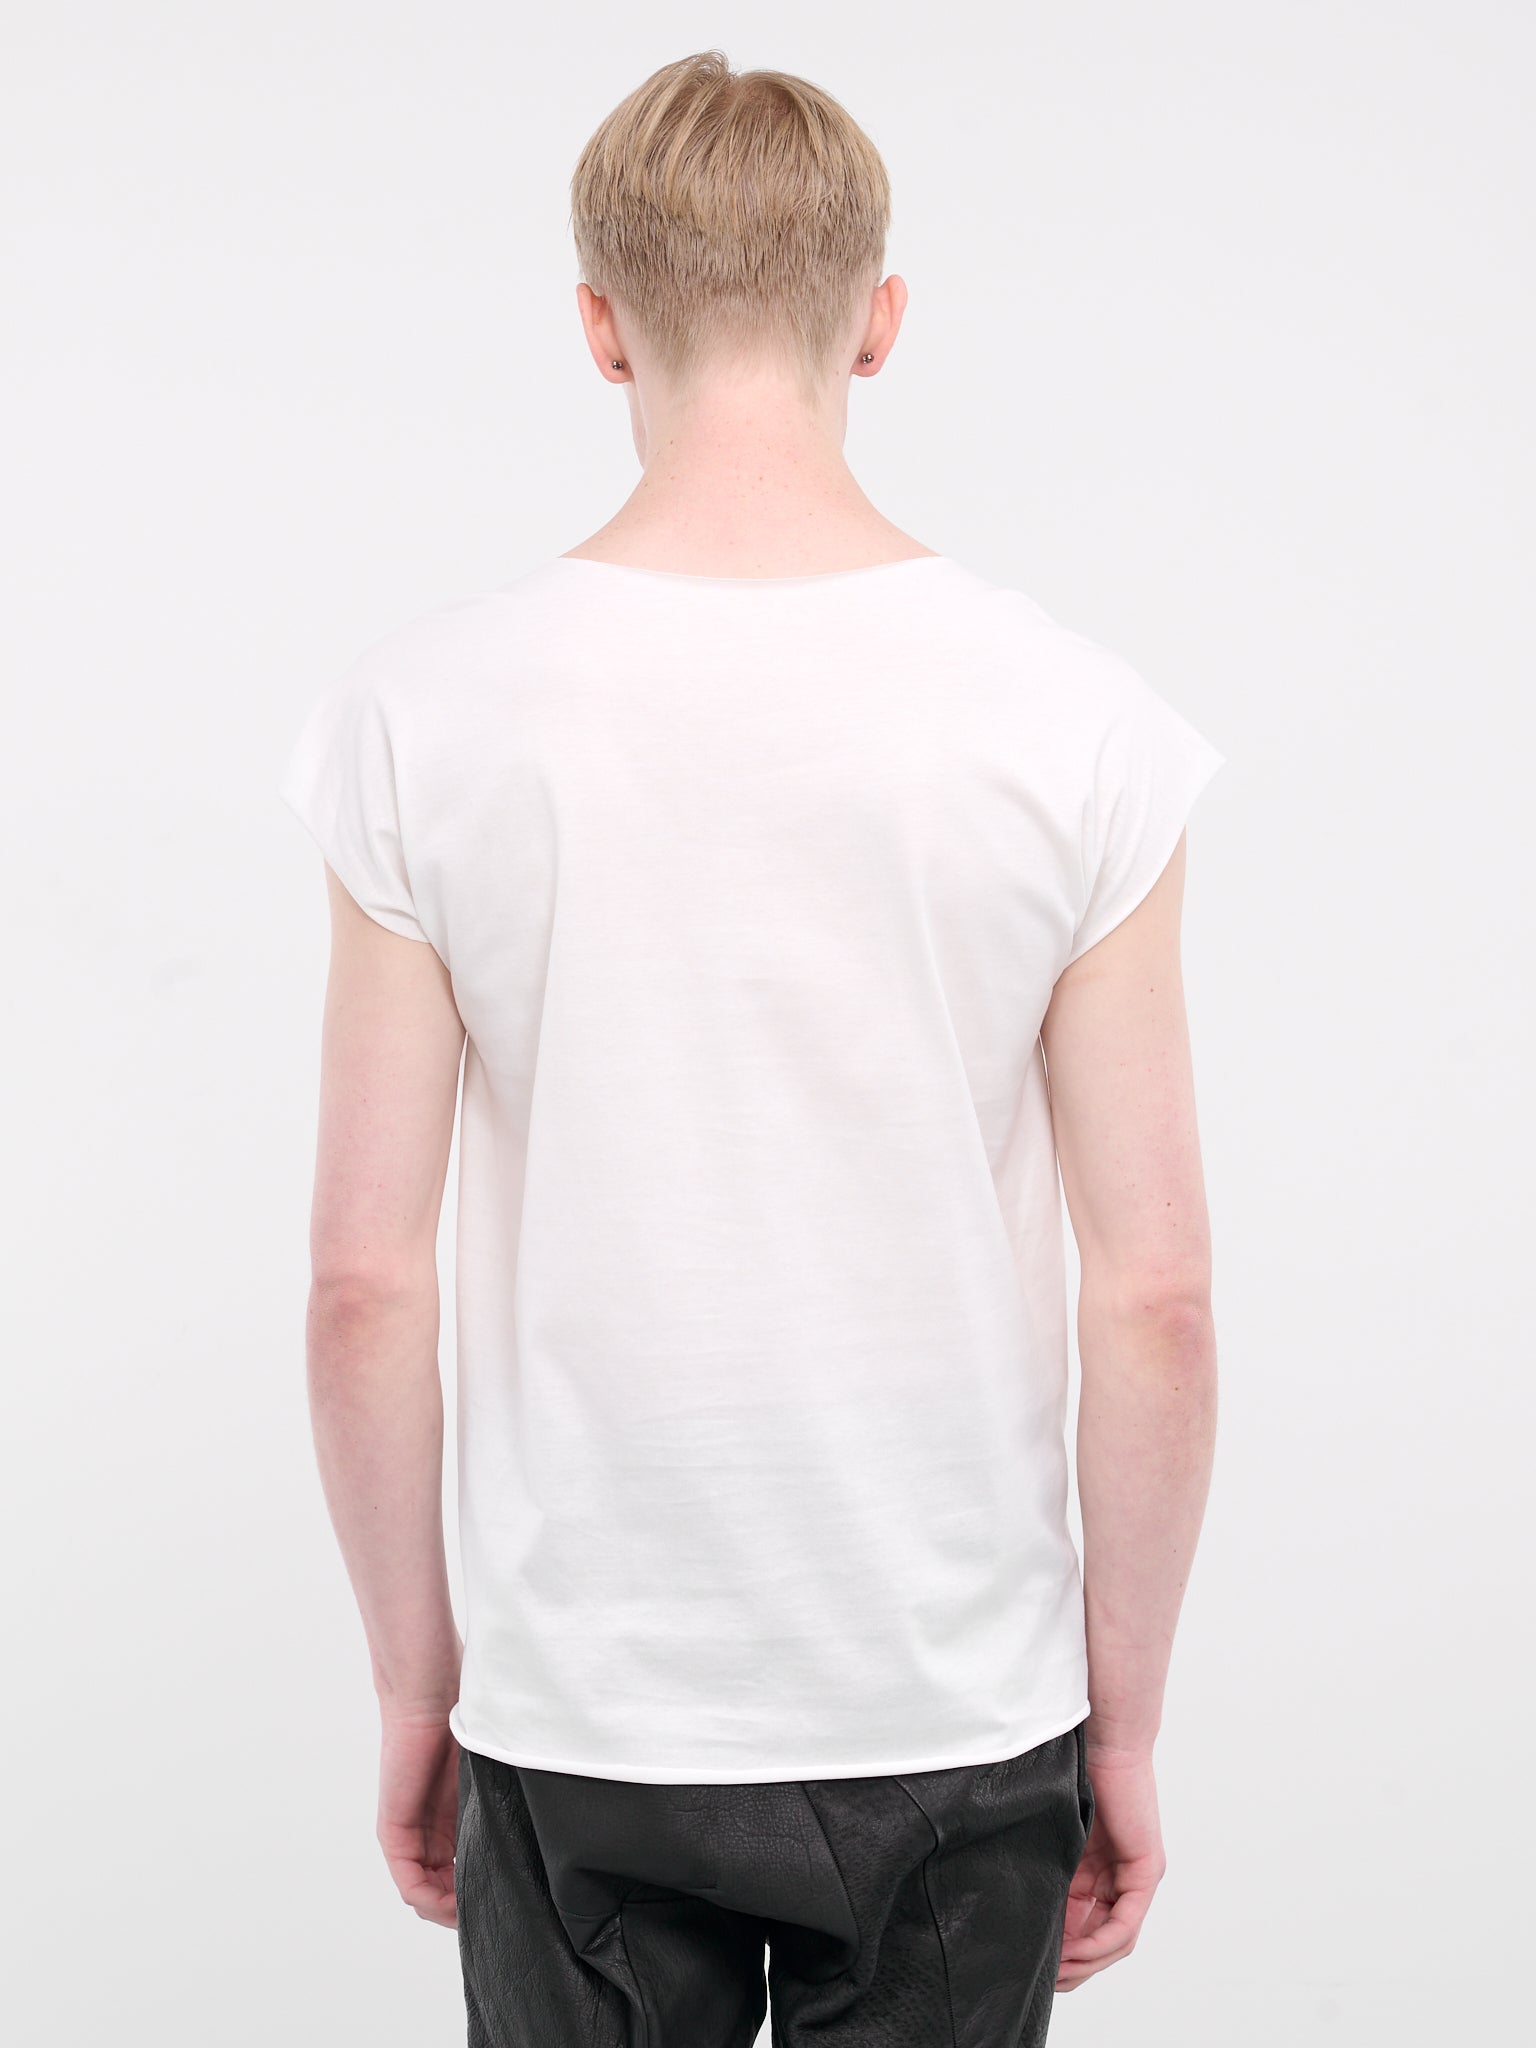 Hand-Stitched One Piece Tee (T211B-JCL10-WHITE)